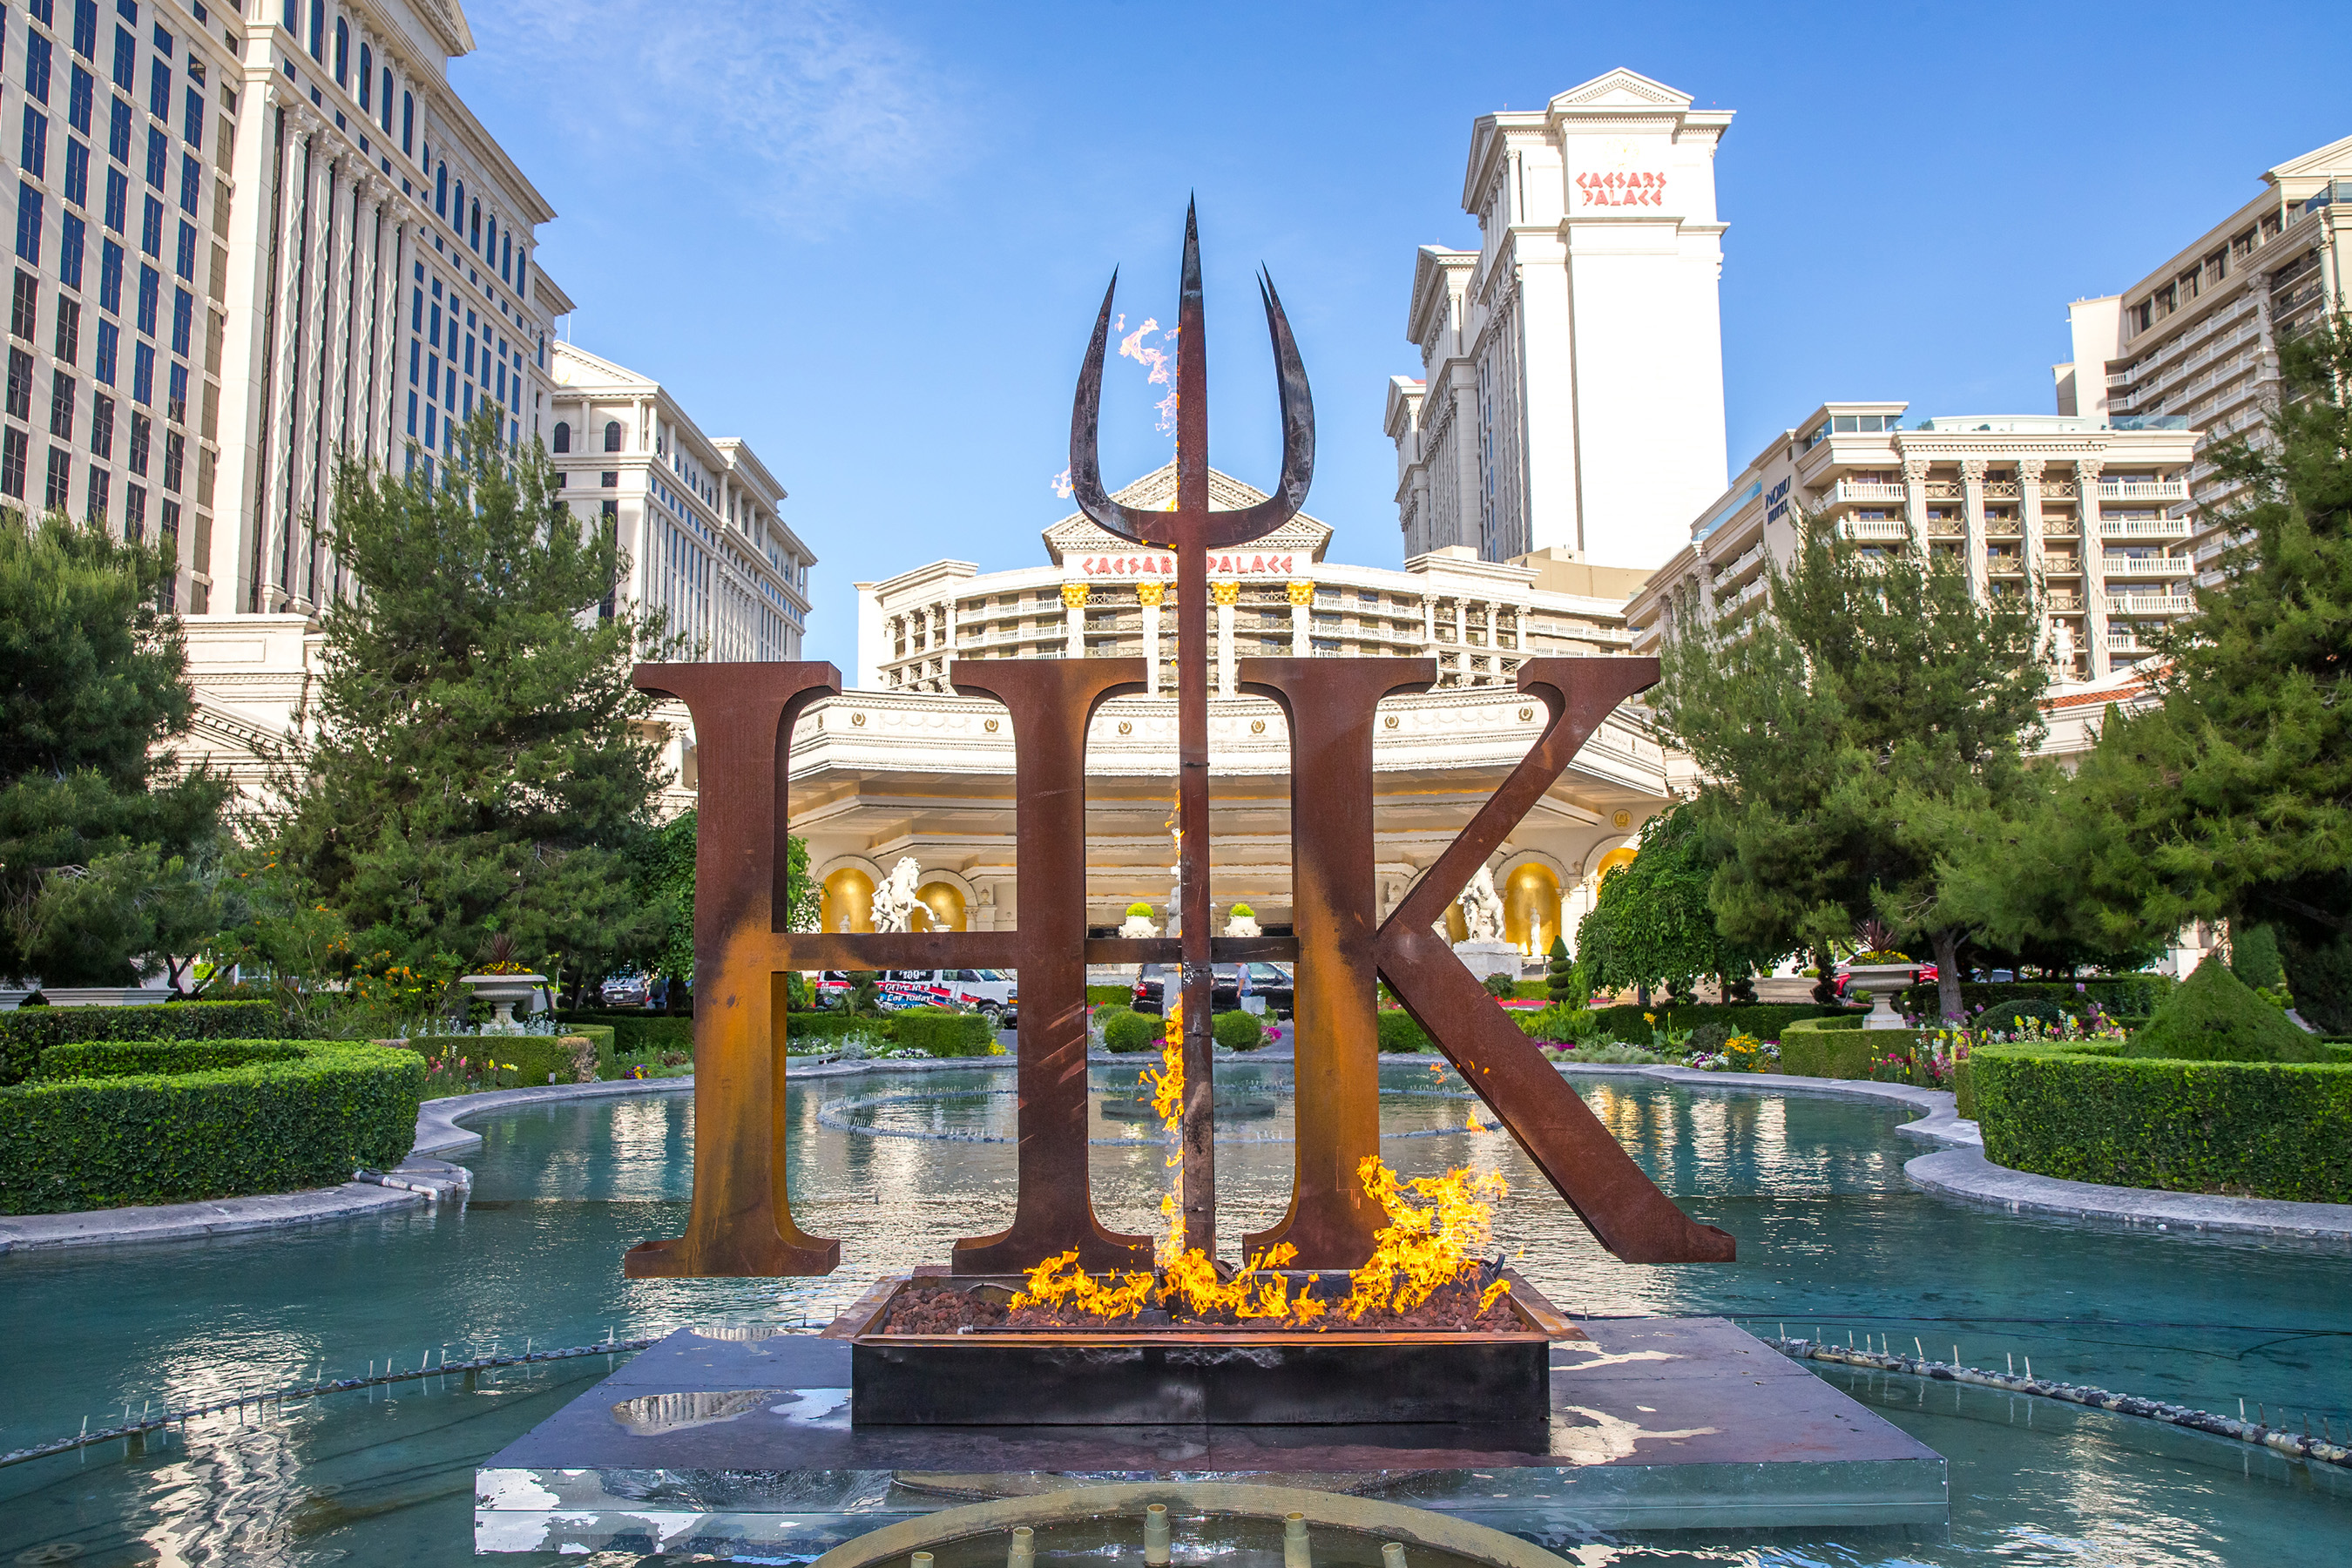 The series' signature pitchfork ignited in the iconic Caesars Palace fountains, heralding the arrival of Gordon Ramsay Hell's Kitchen restaurant